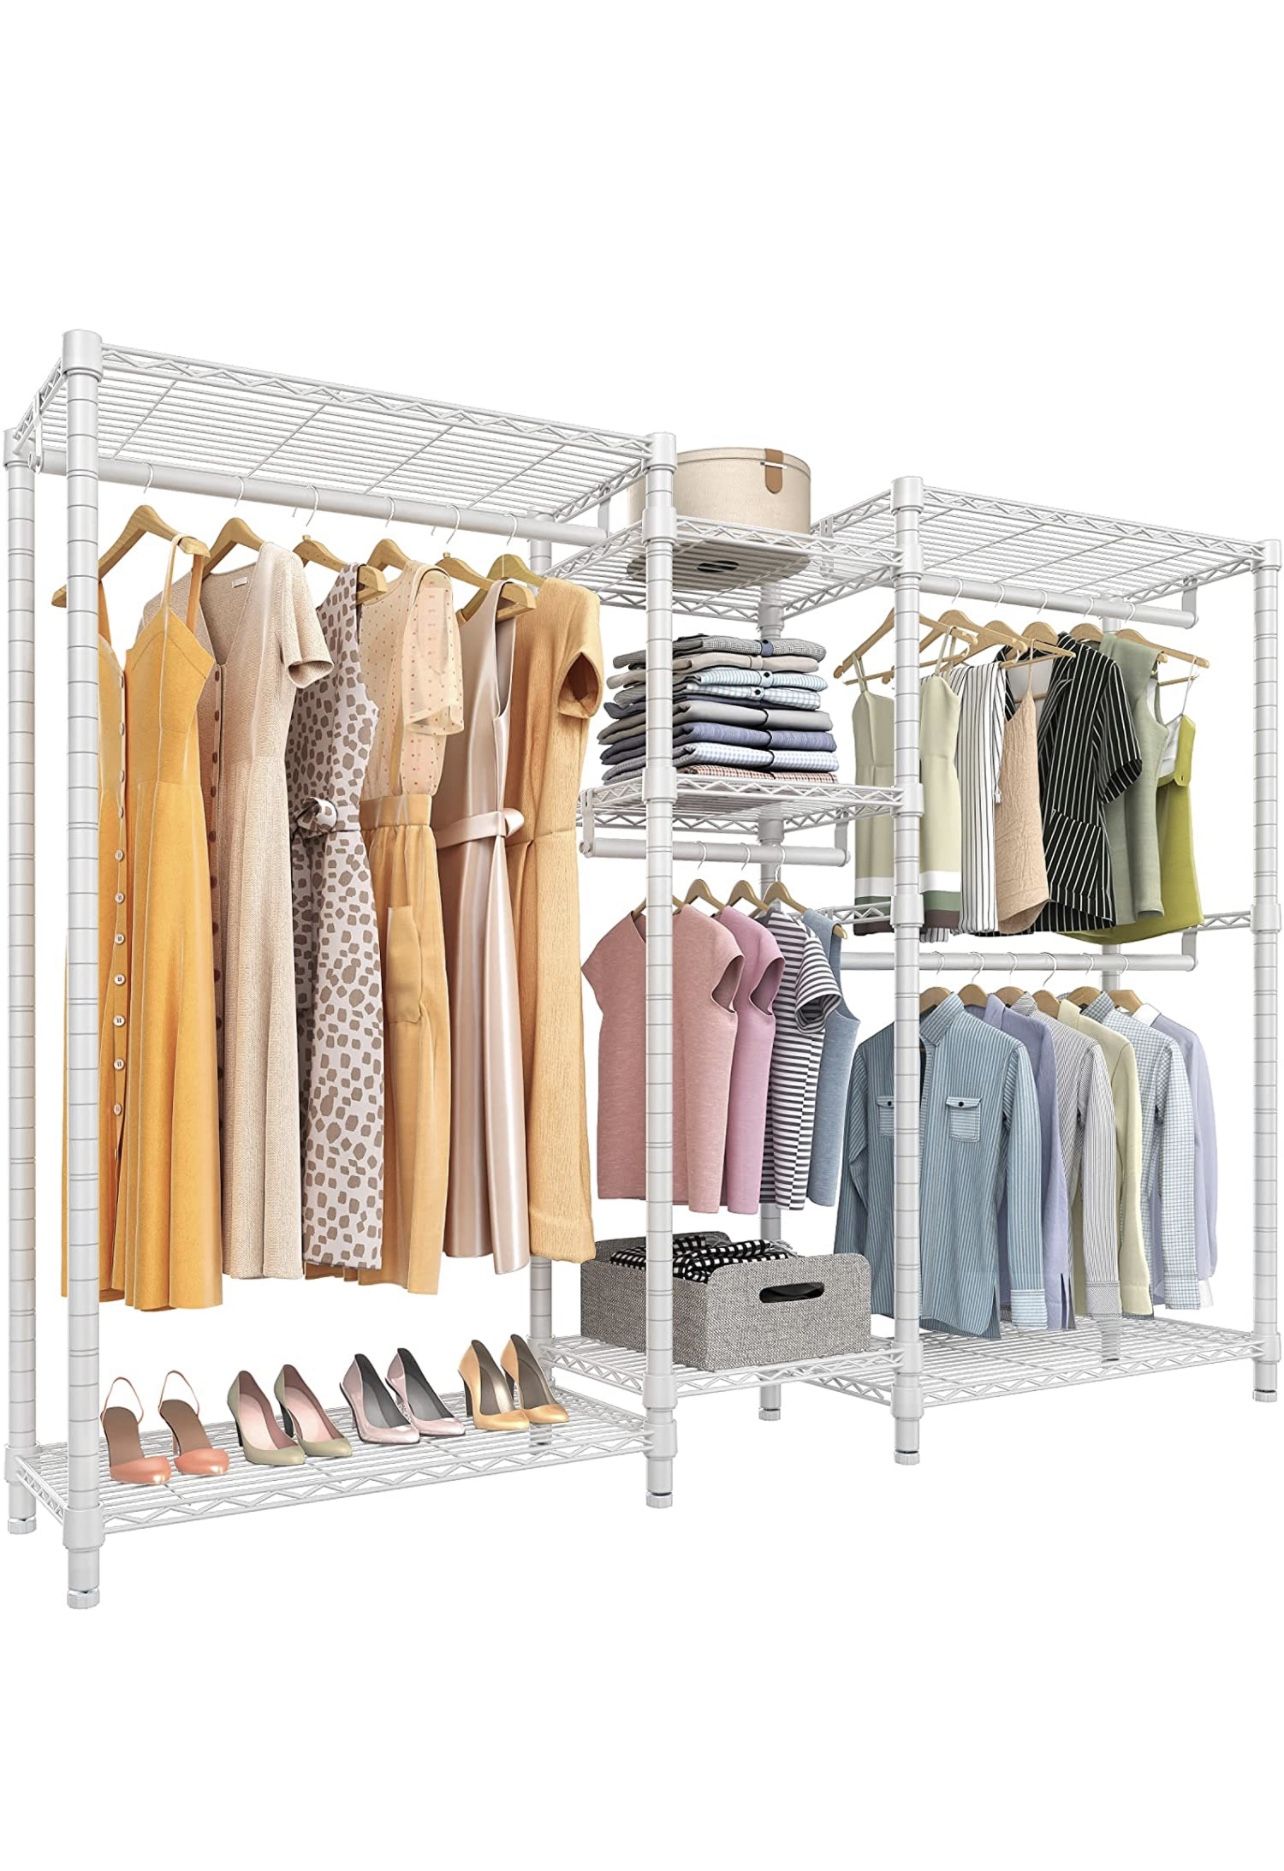 VIPEK V6 Wire Garment Rack 5 Tiers Heavy Duty Clothes Rack for Hanging Clothes, Wardrobe Rack Compact Large Metal Clothing Rack Freestanding Closet St